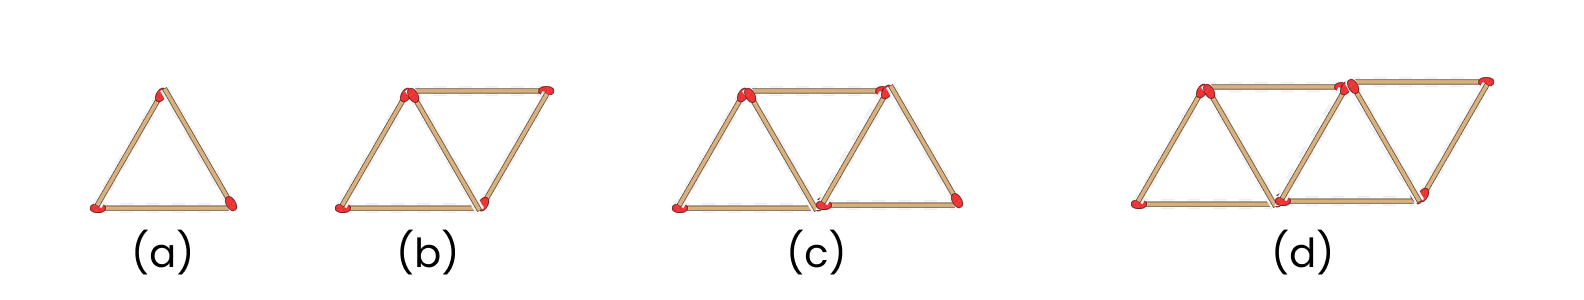 matchstick pattern of triangles